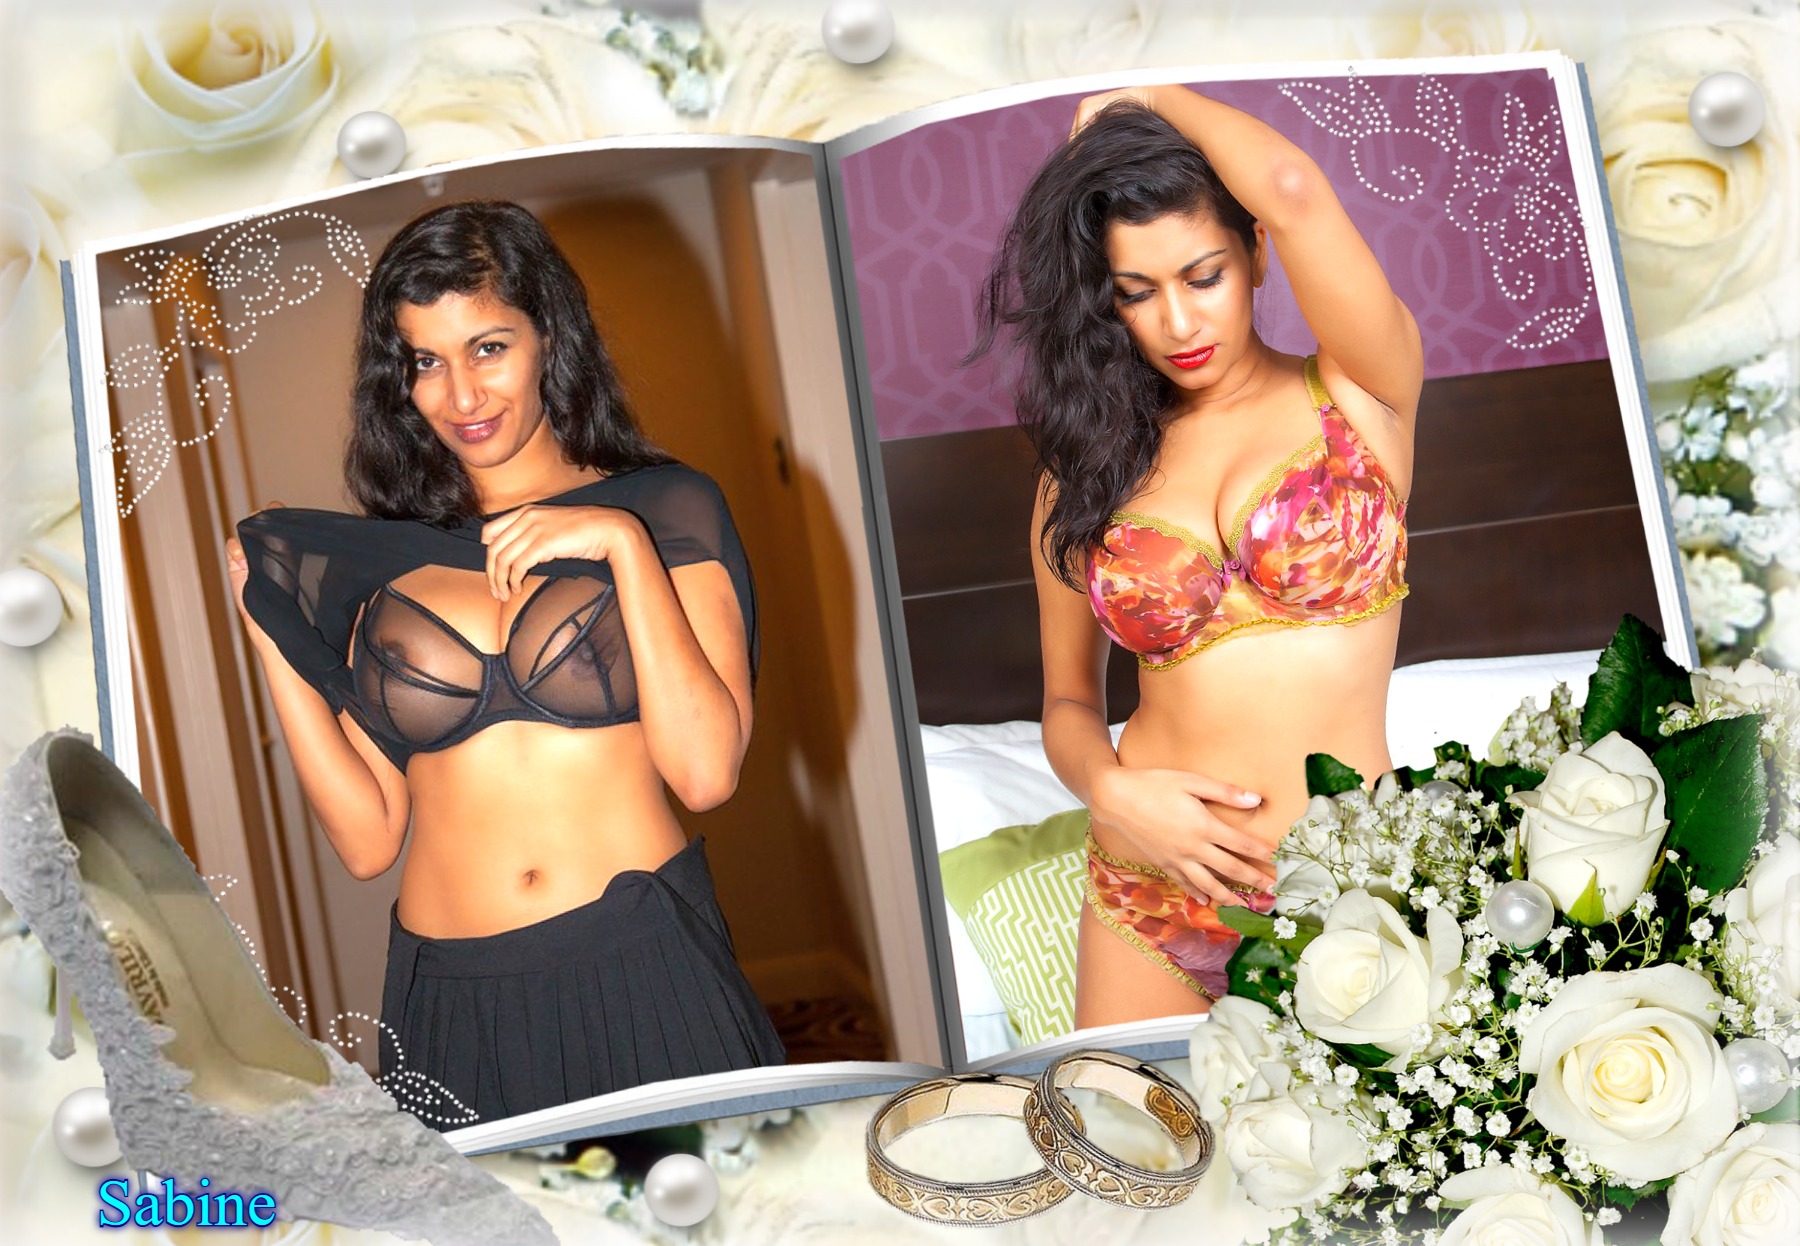 You are currently viewing “Voluptuous Glam Model of Indian Descent- Sabine”